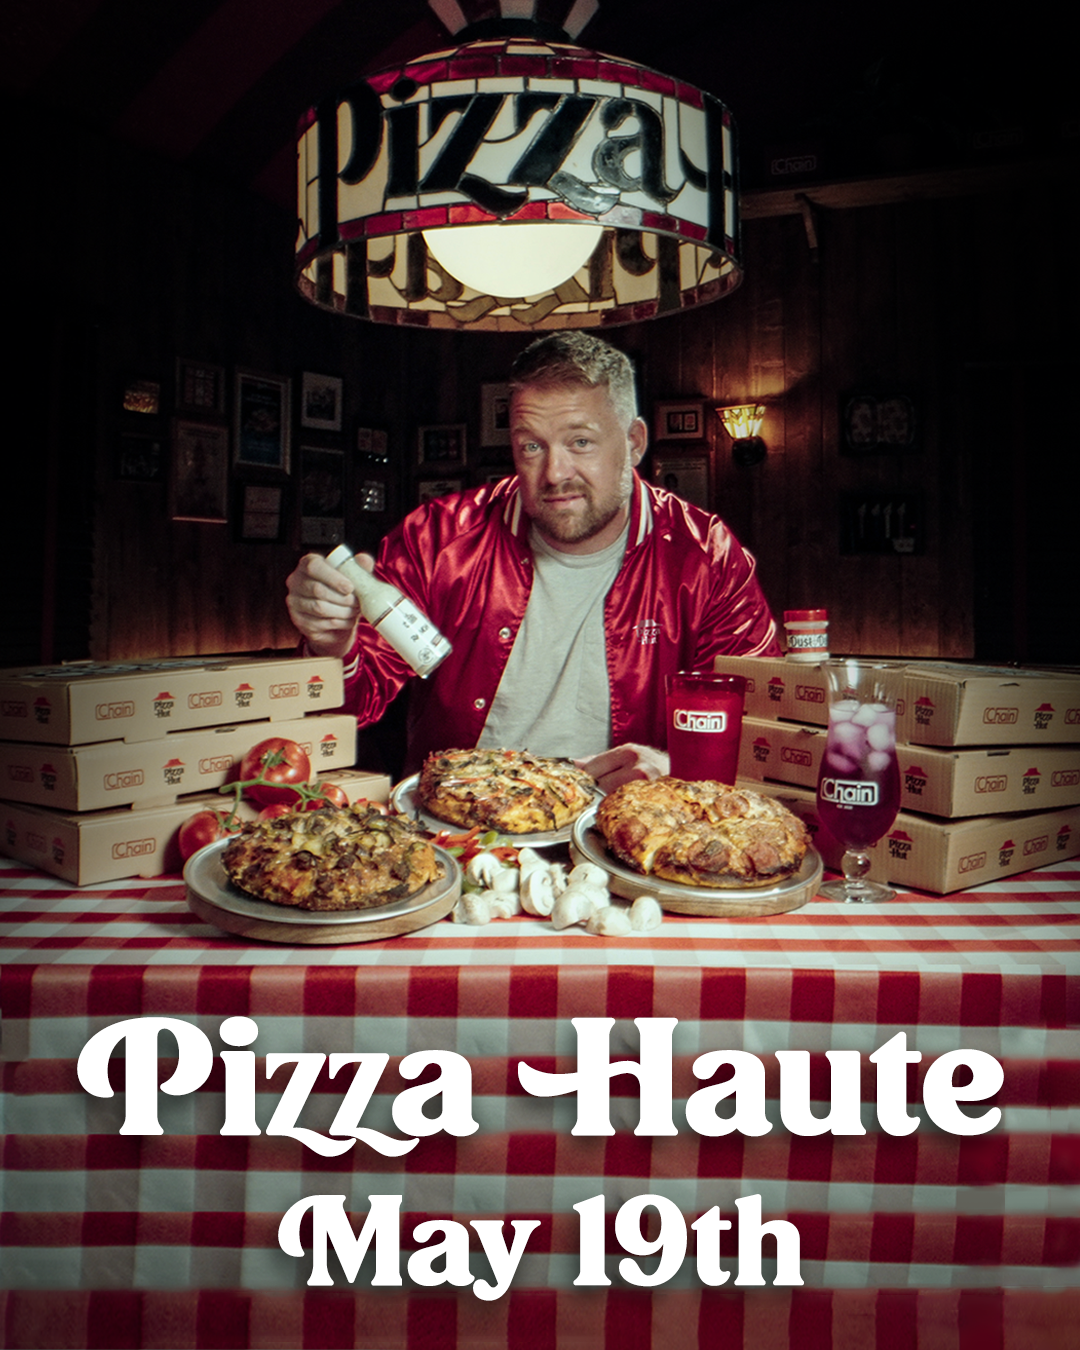 Pizza Haute - 5.19 - Party of four